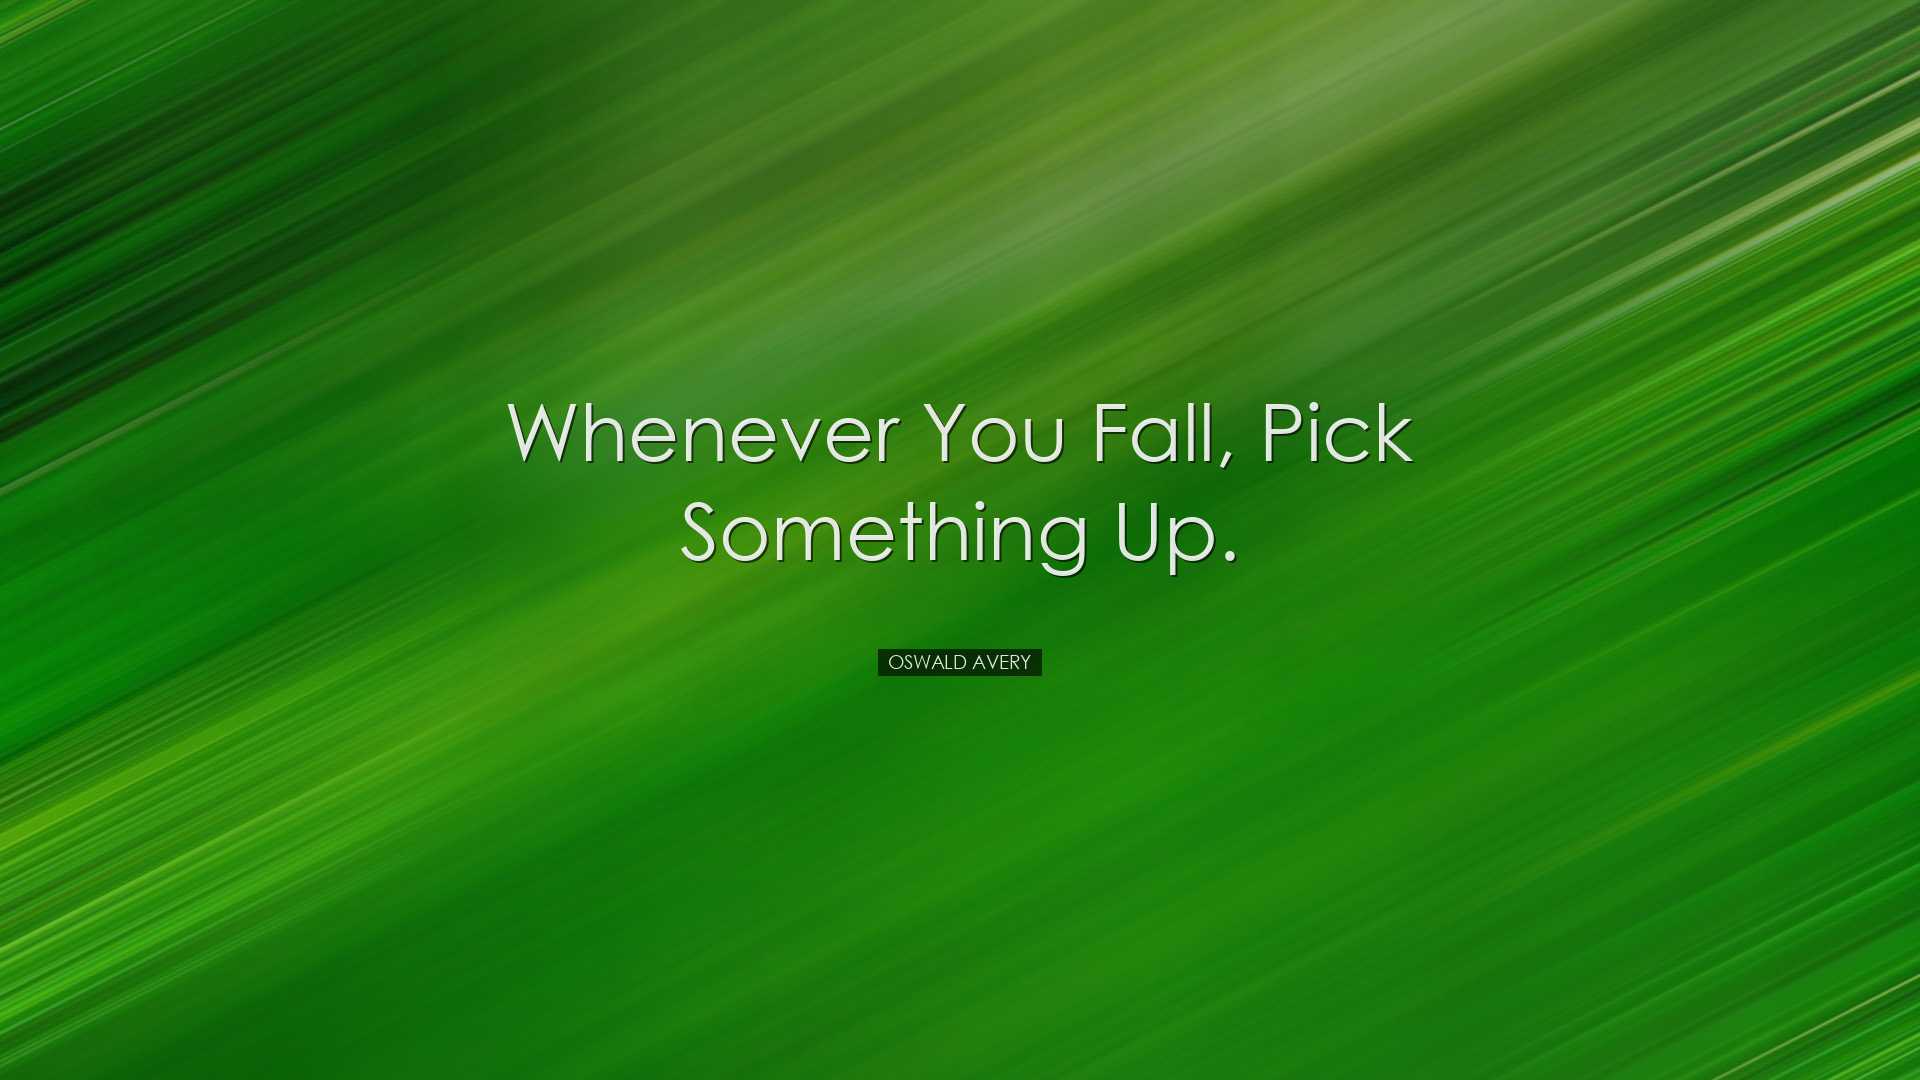 Whenever you fall, pick something up. - Oswald Avery